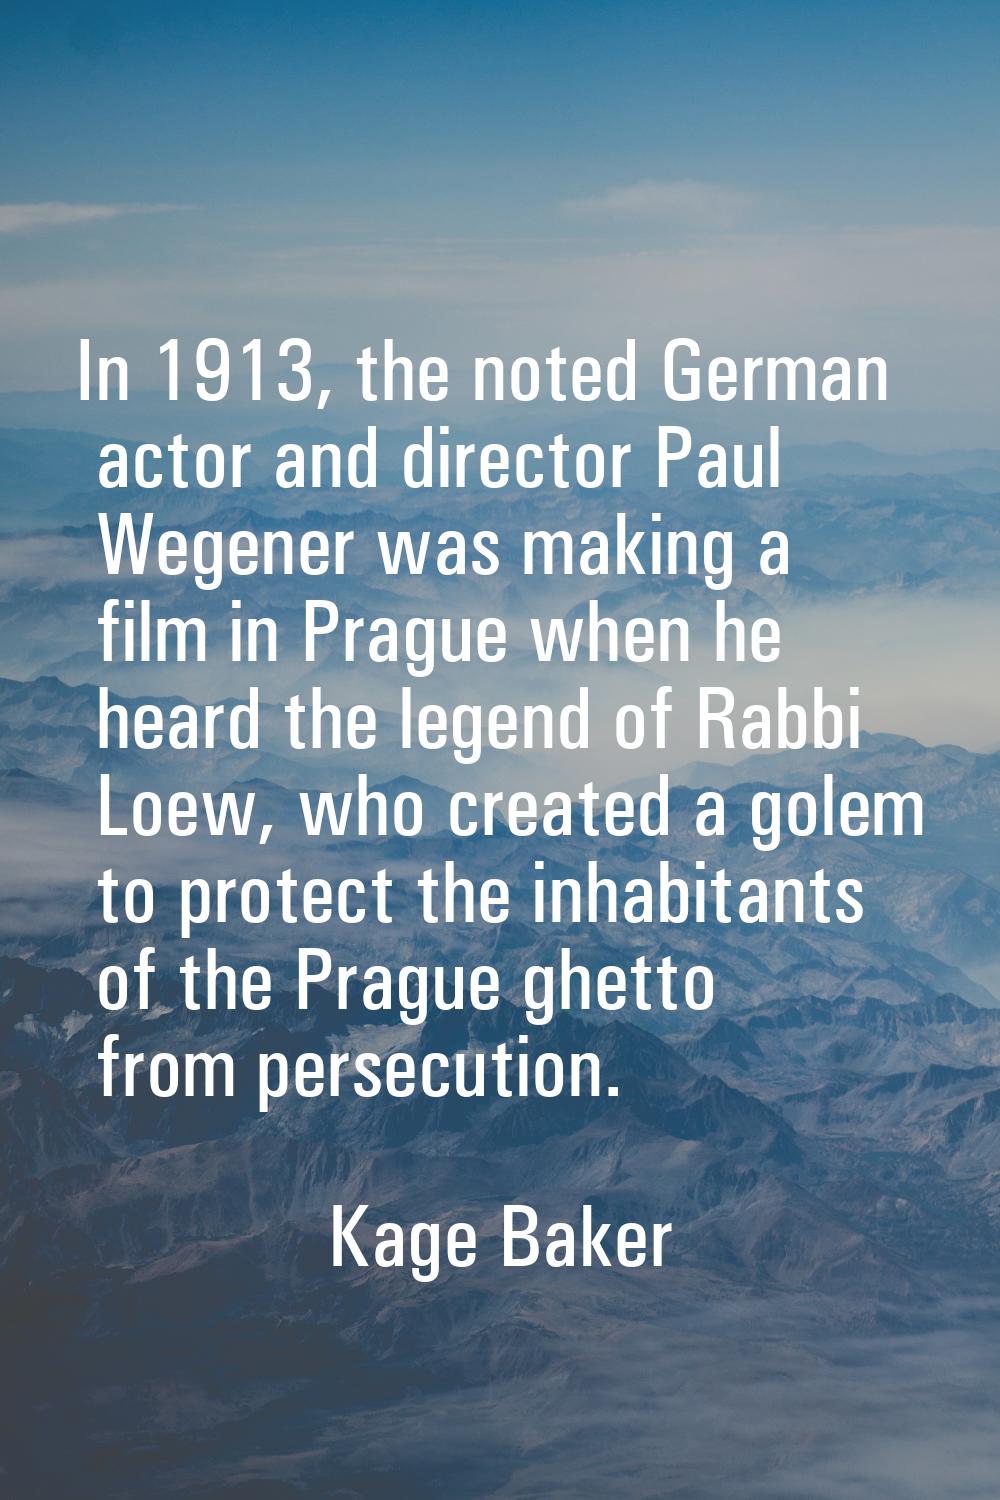 In 1913, the noted German actor and director Paul Wegener was making a film in Prague when he heard